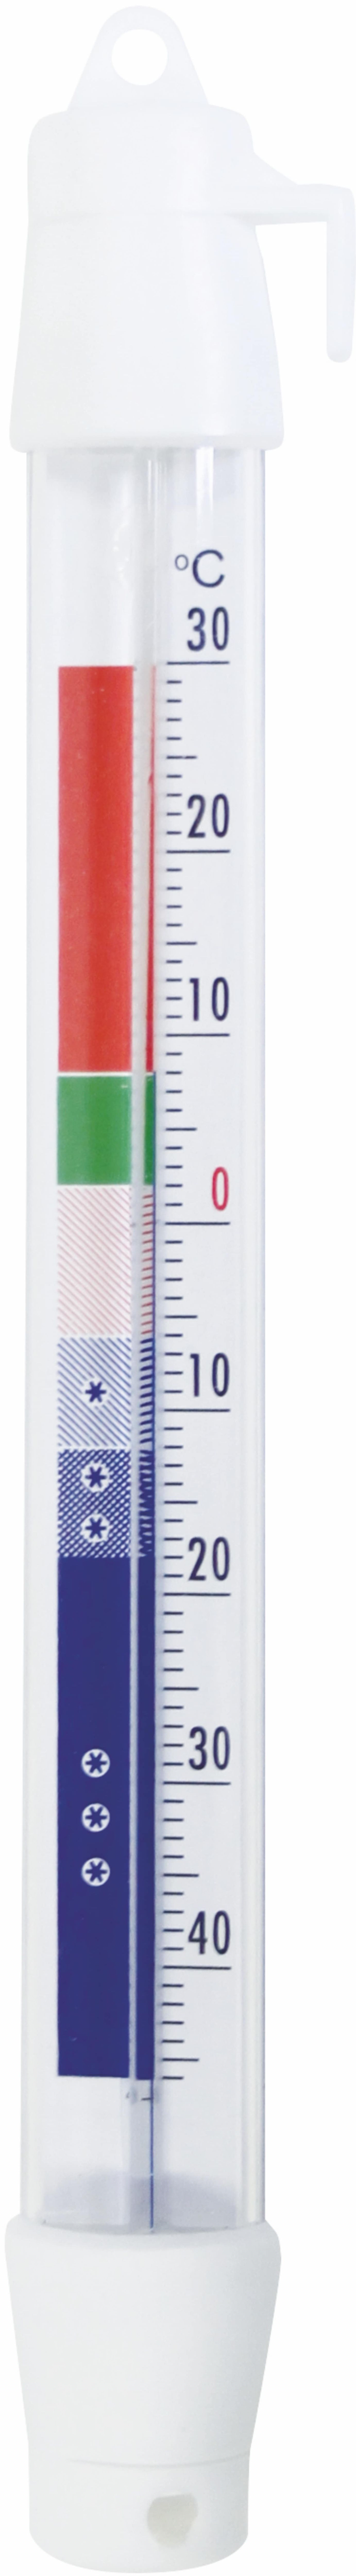 Thermometer 160034